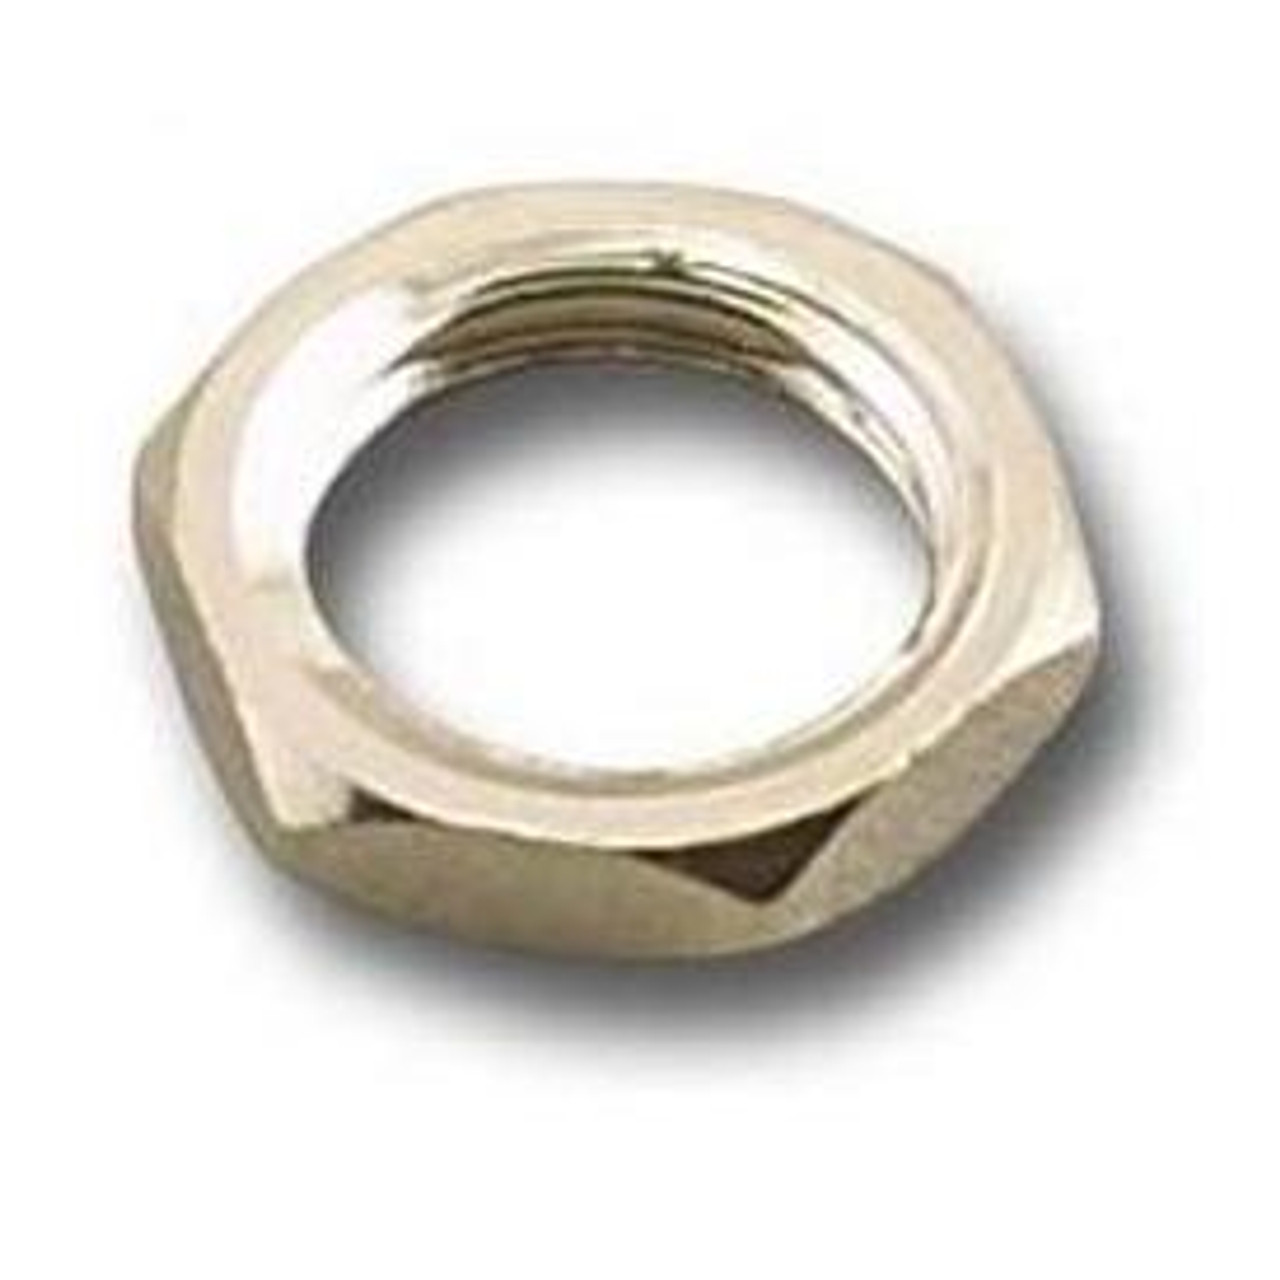 Nickel Plated Hex Nut for SMA-Female Connector - 50-Pack (SMA-HN8-N)